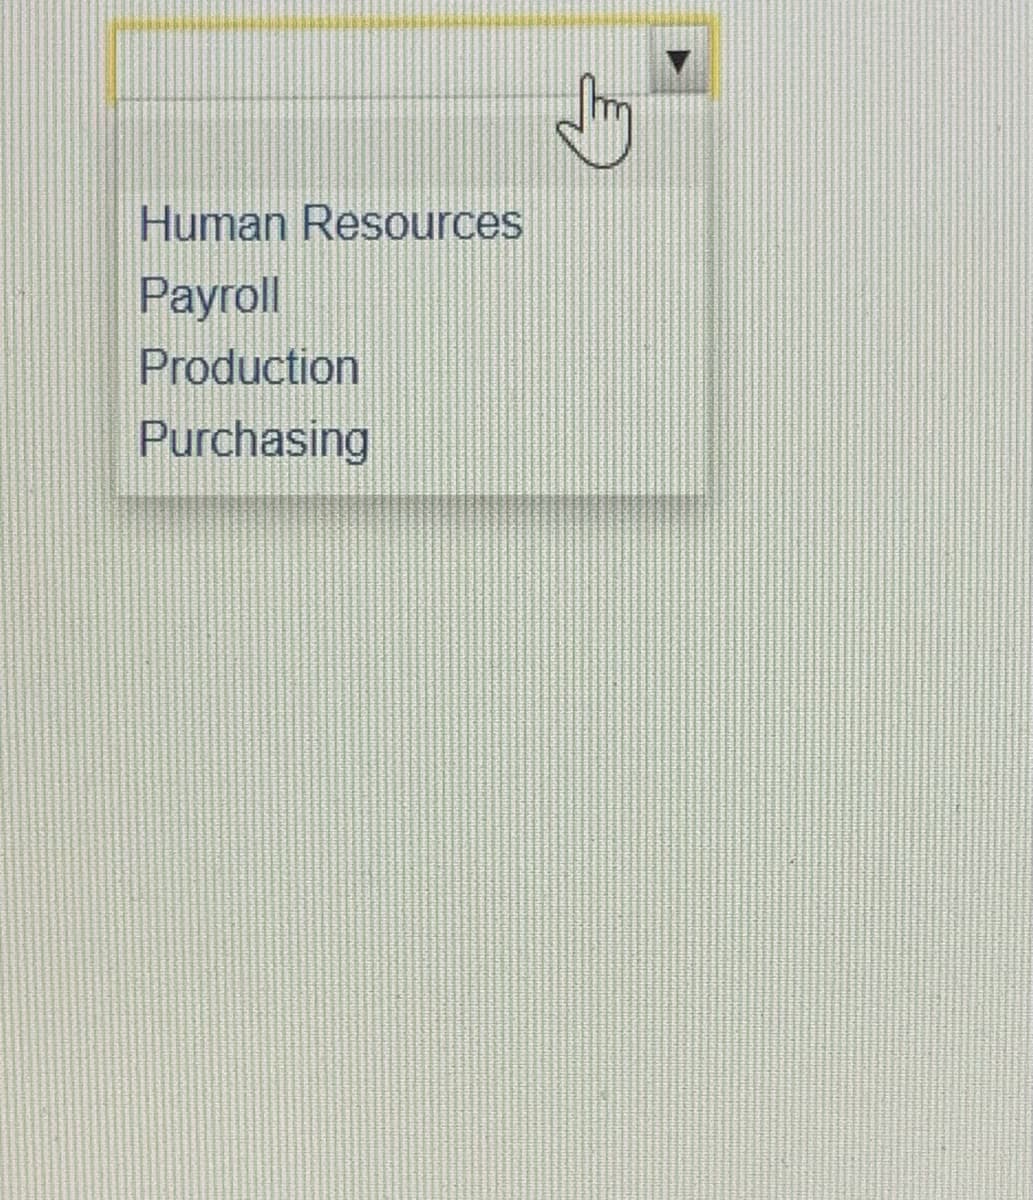 Human Resources
Payroll
Production
Purchasing
